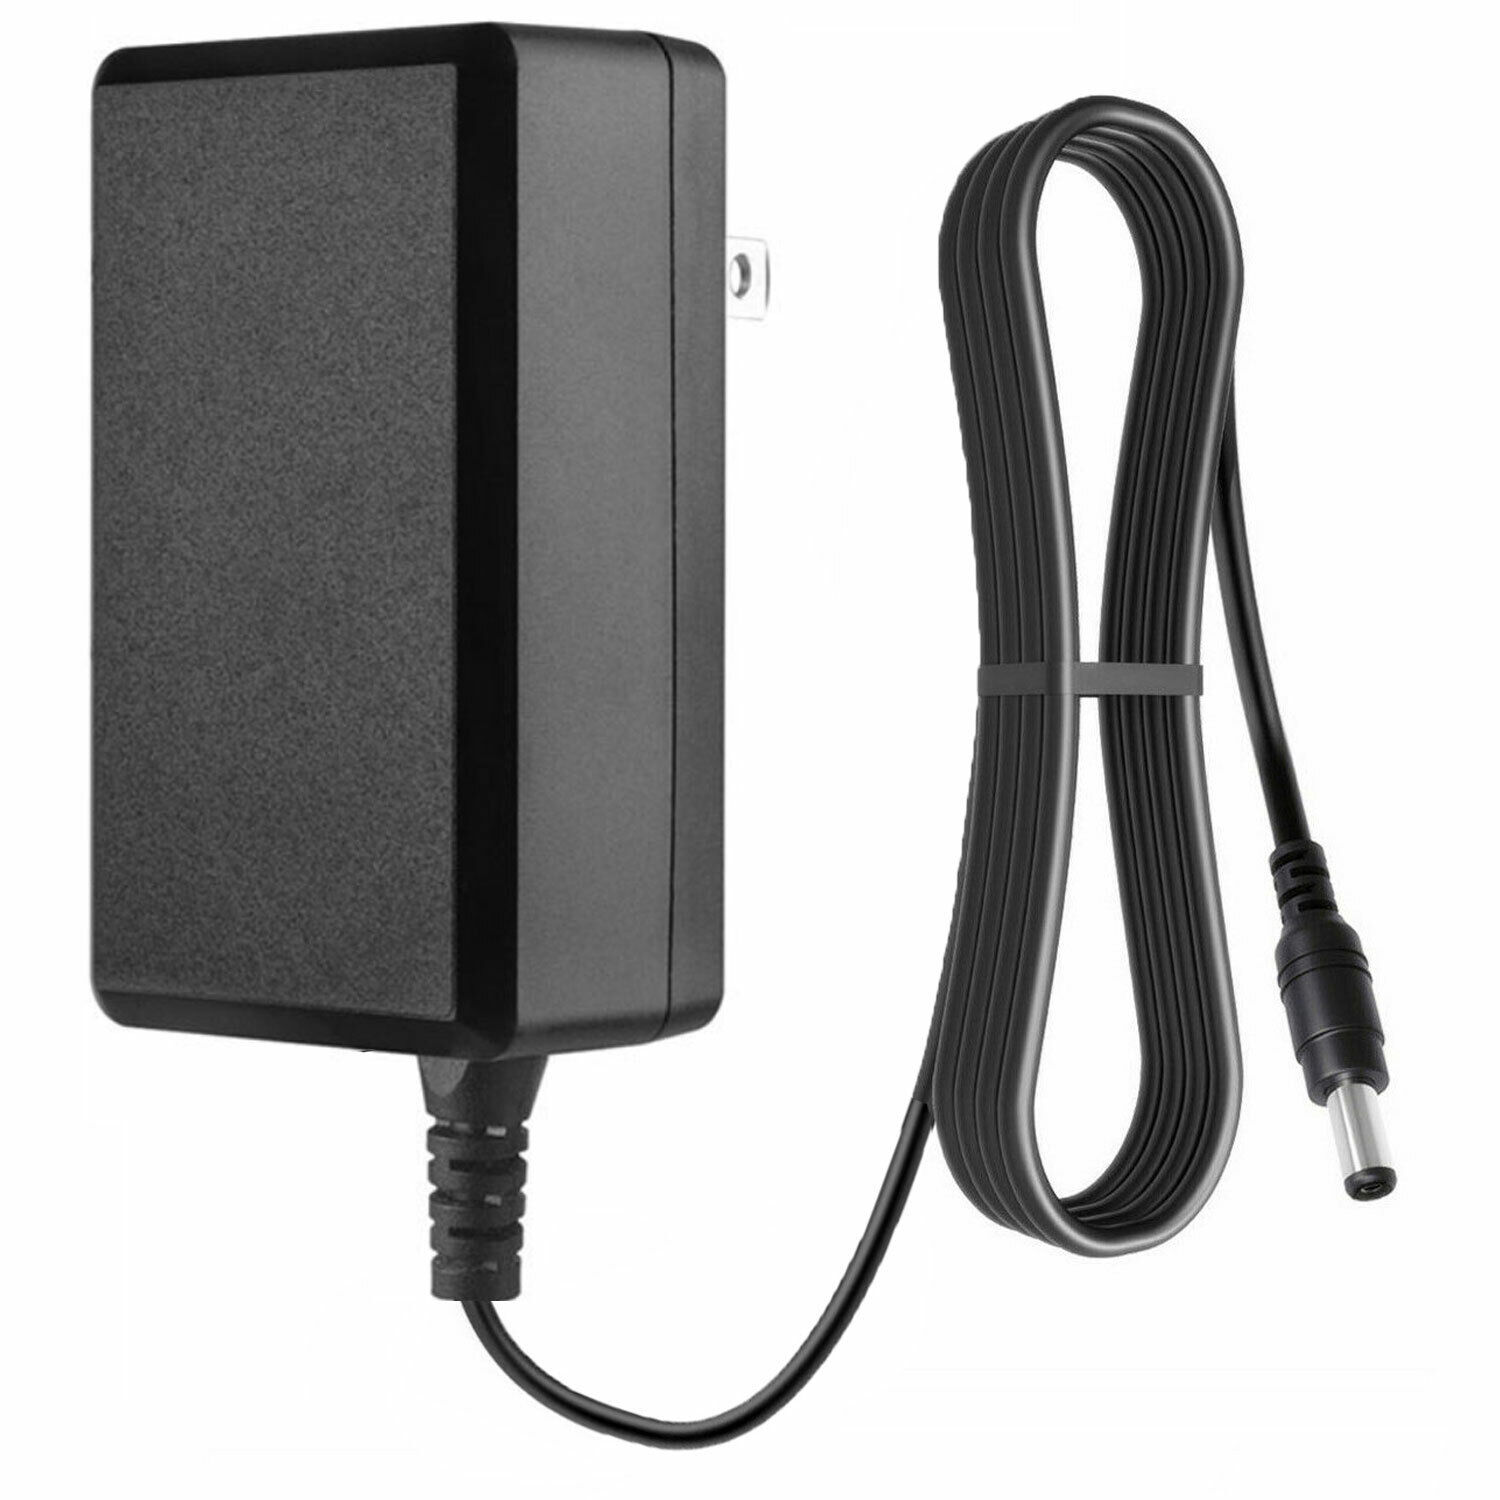 AC Adapter For Dehumidifier DH-CS01 3Y3 GQ48-120350-AU Power supply charger Type AC/DC Adapter Connection Split/Duplica